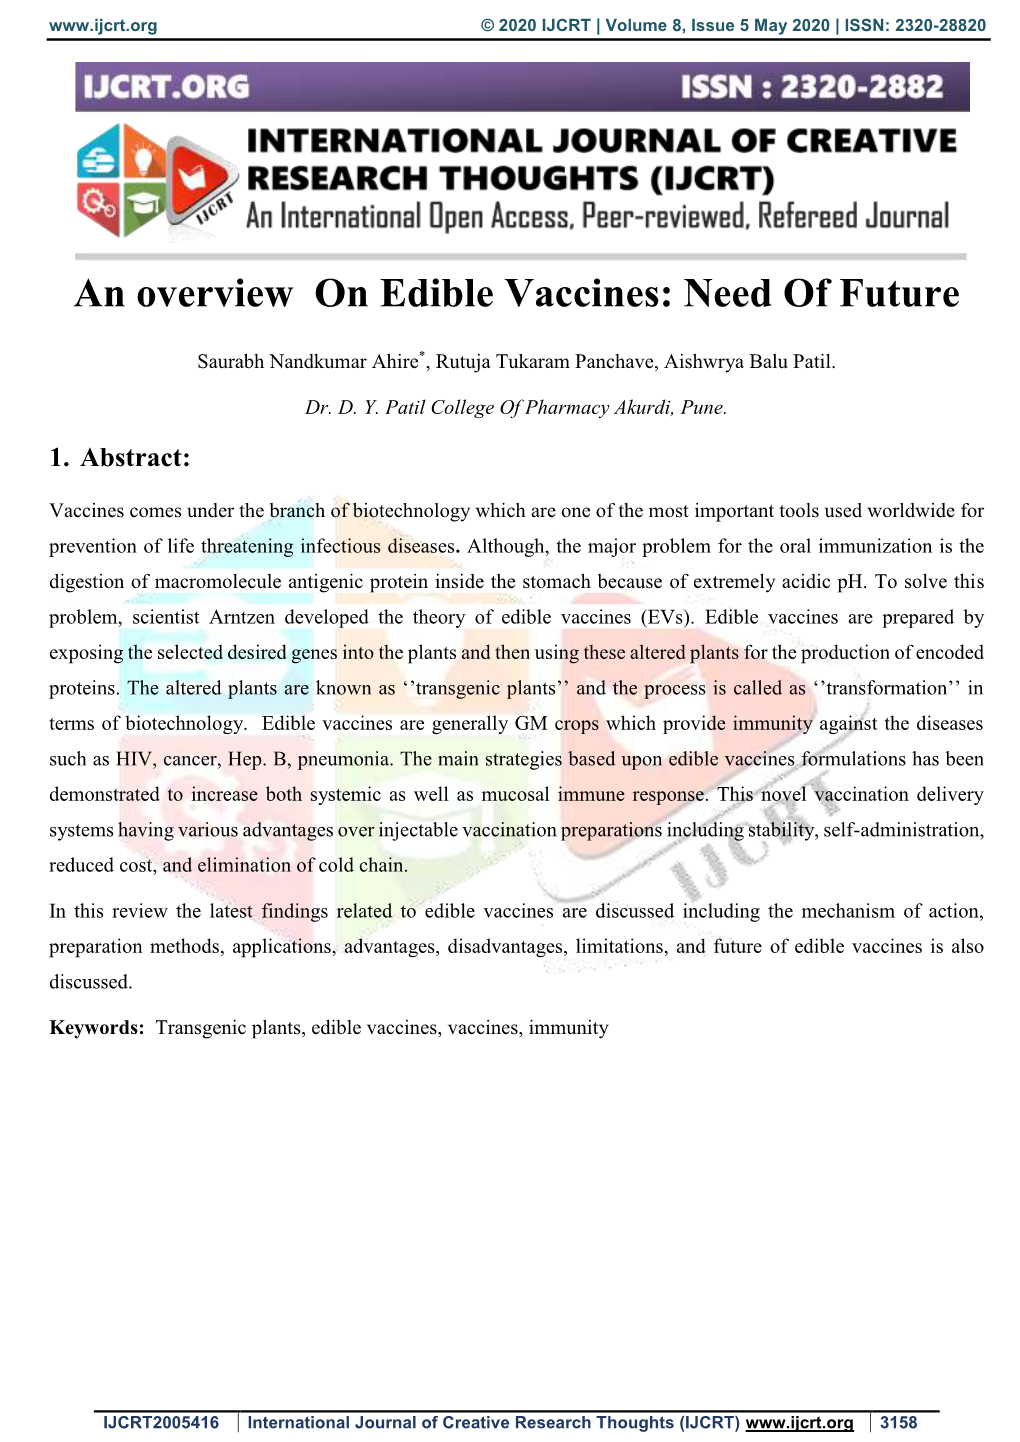 An Overview on Edible Vaccines: Need of Future